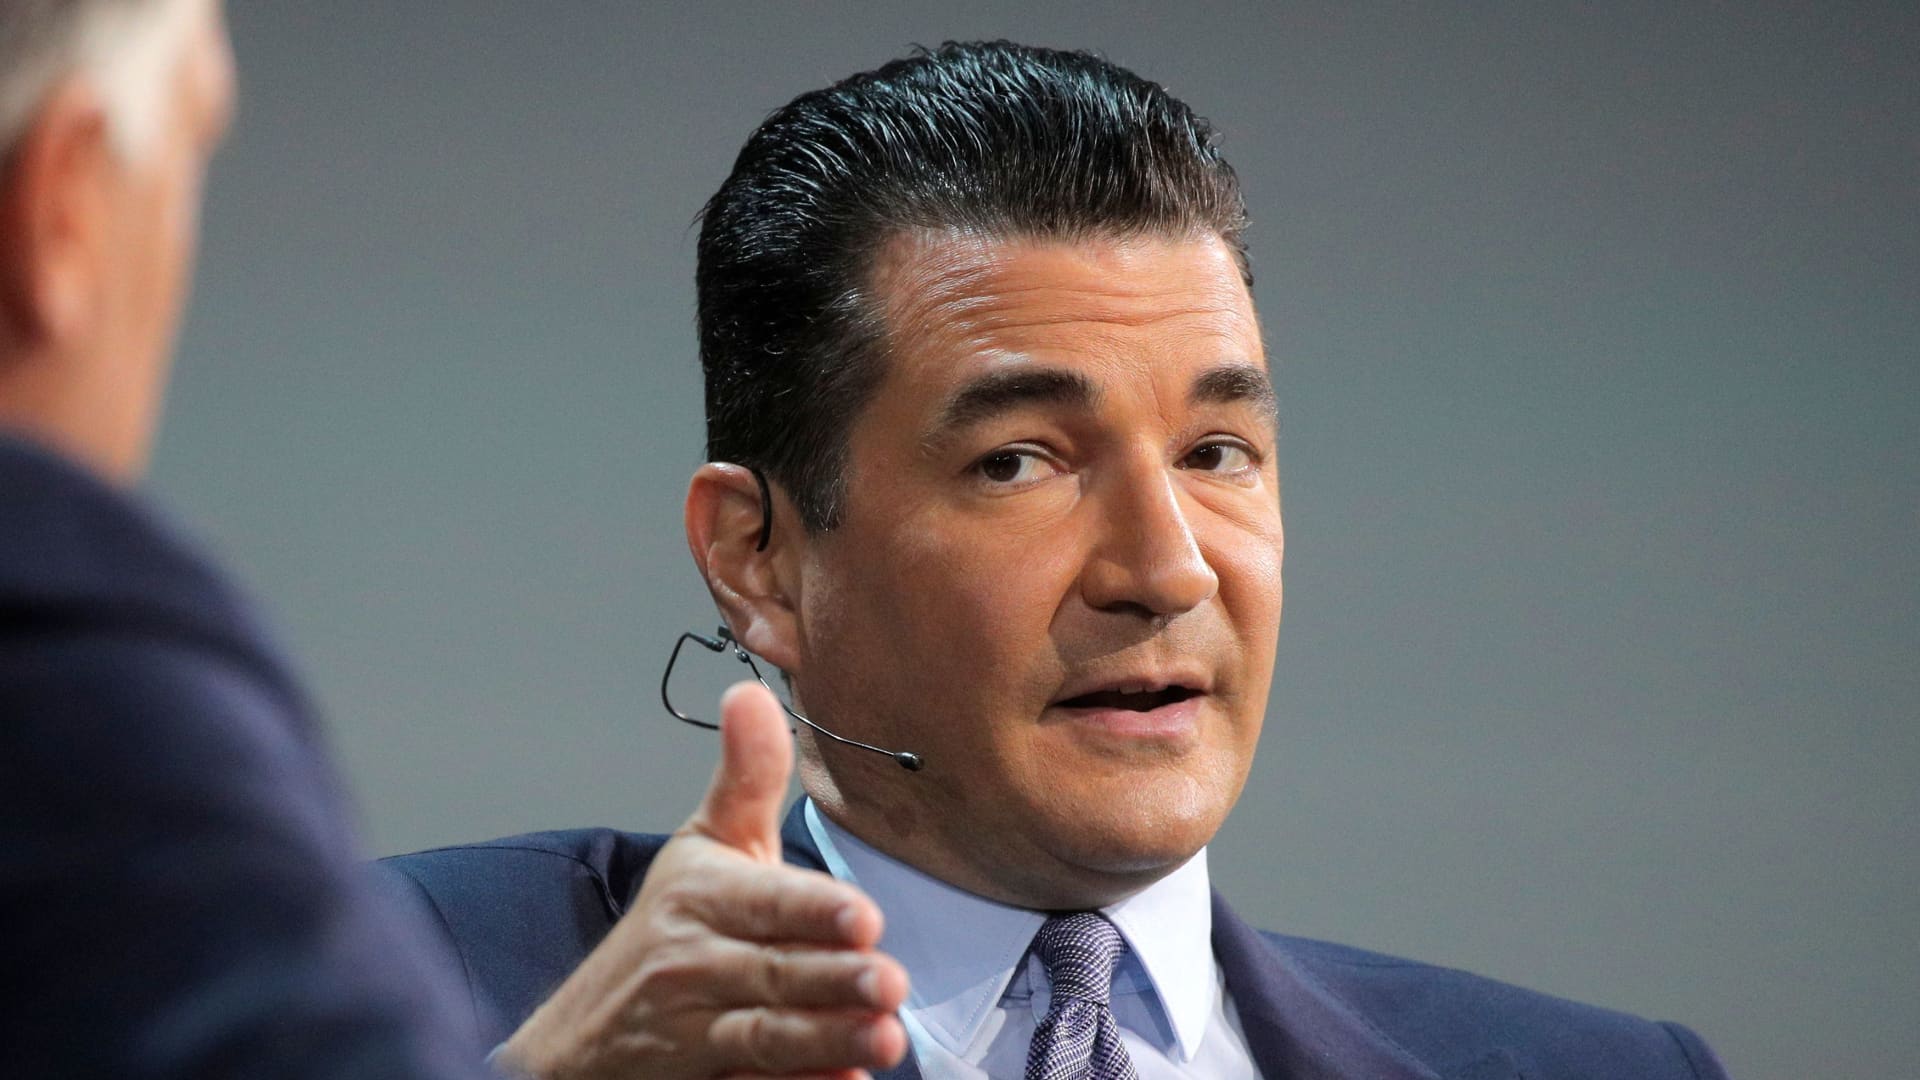 Dr. Scott Gottlieb believes omicron BA.2 subvariant unlikely to cause ‘national wave’ in U.S.